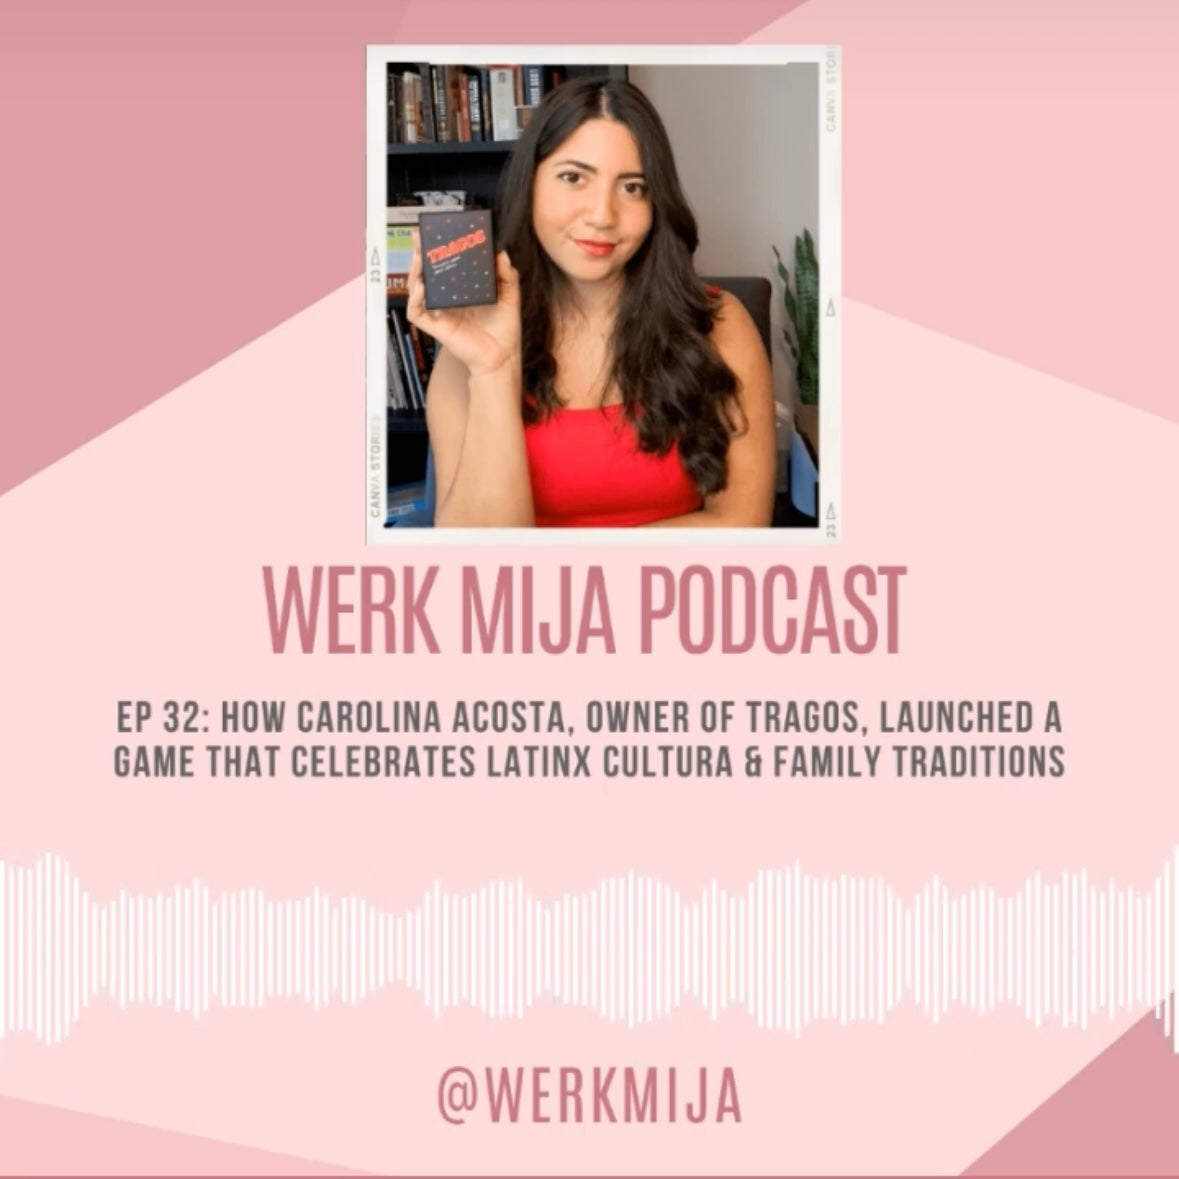 werk mija podcast episode 32 - how carolina acosta, owner of tragos, launched a game that celebrates latinx cultura and family traditions